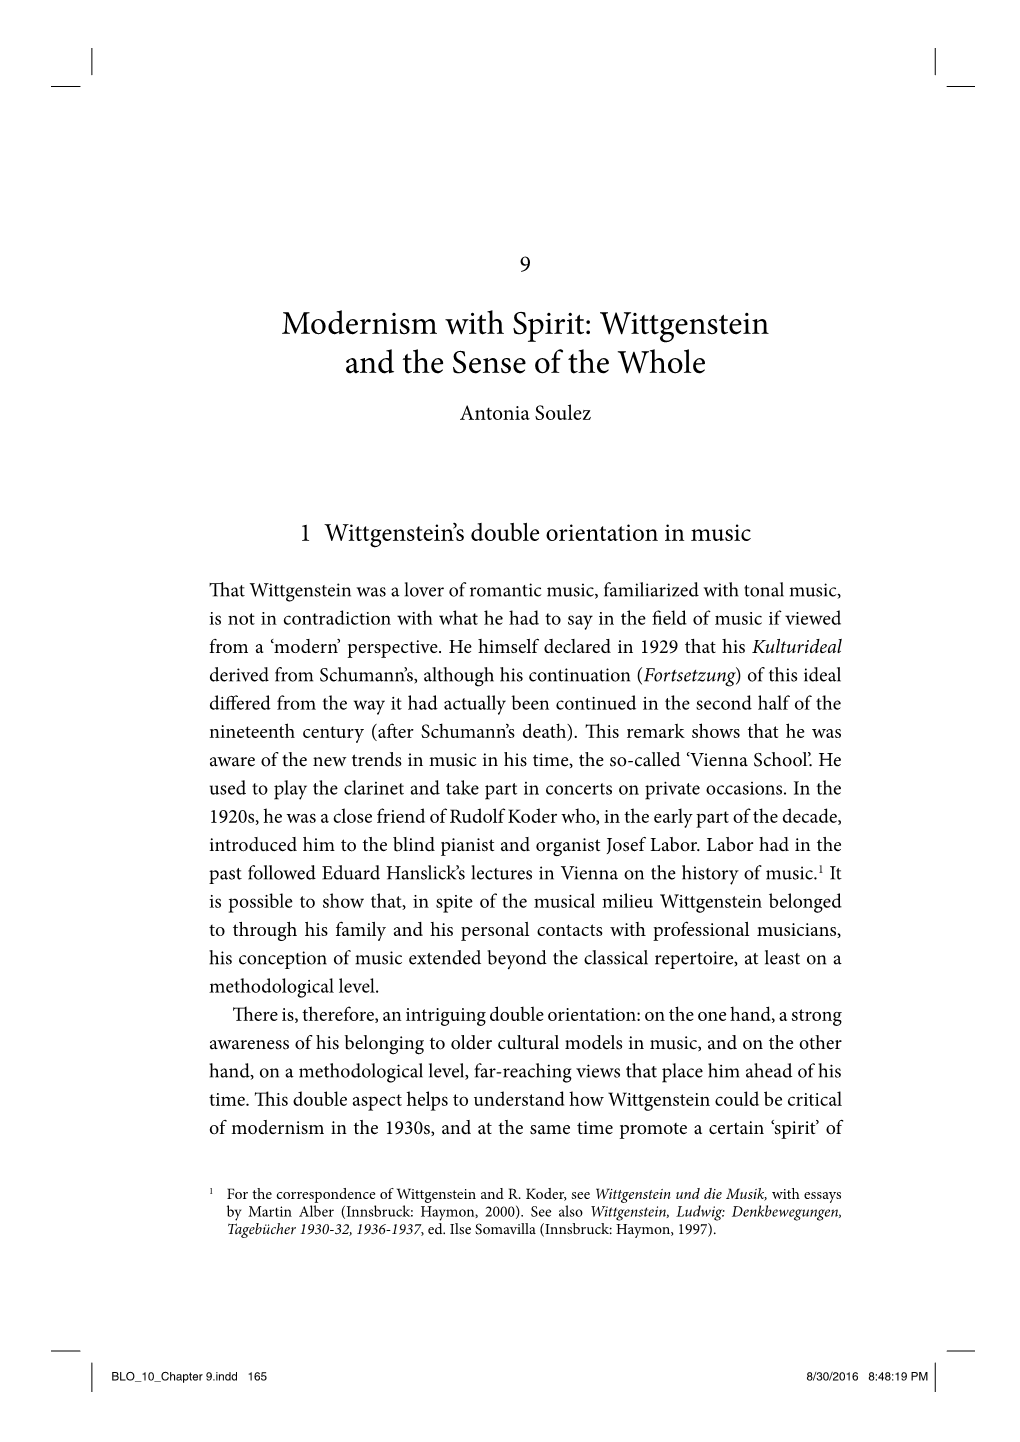 Modernism with Spirit: Wittgenstein and the Sense of the Whole Antonia Soulez